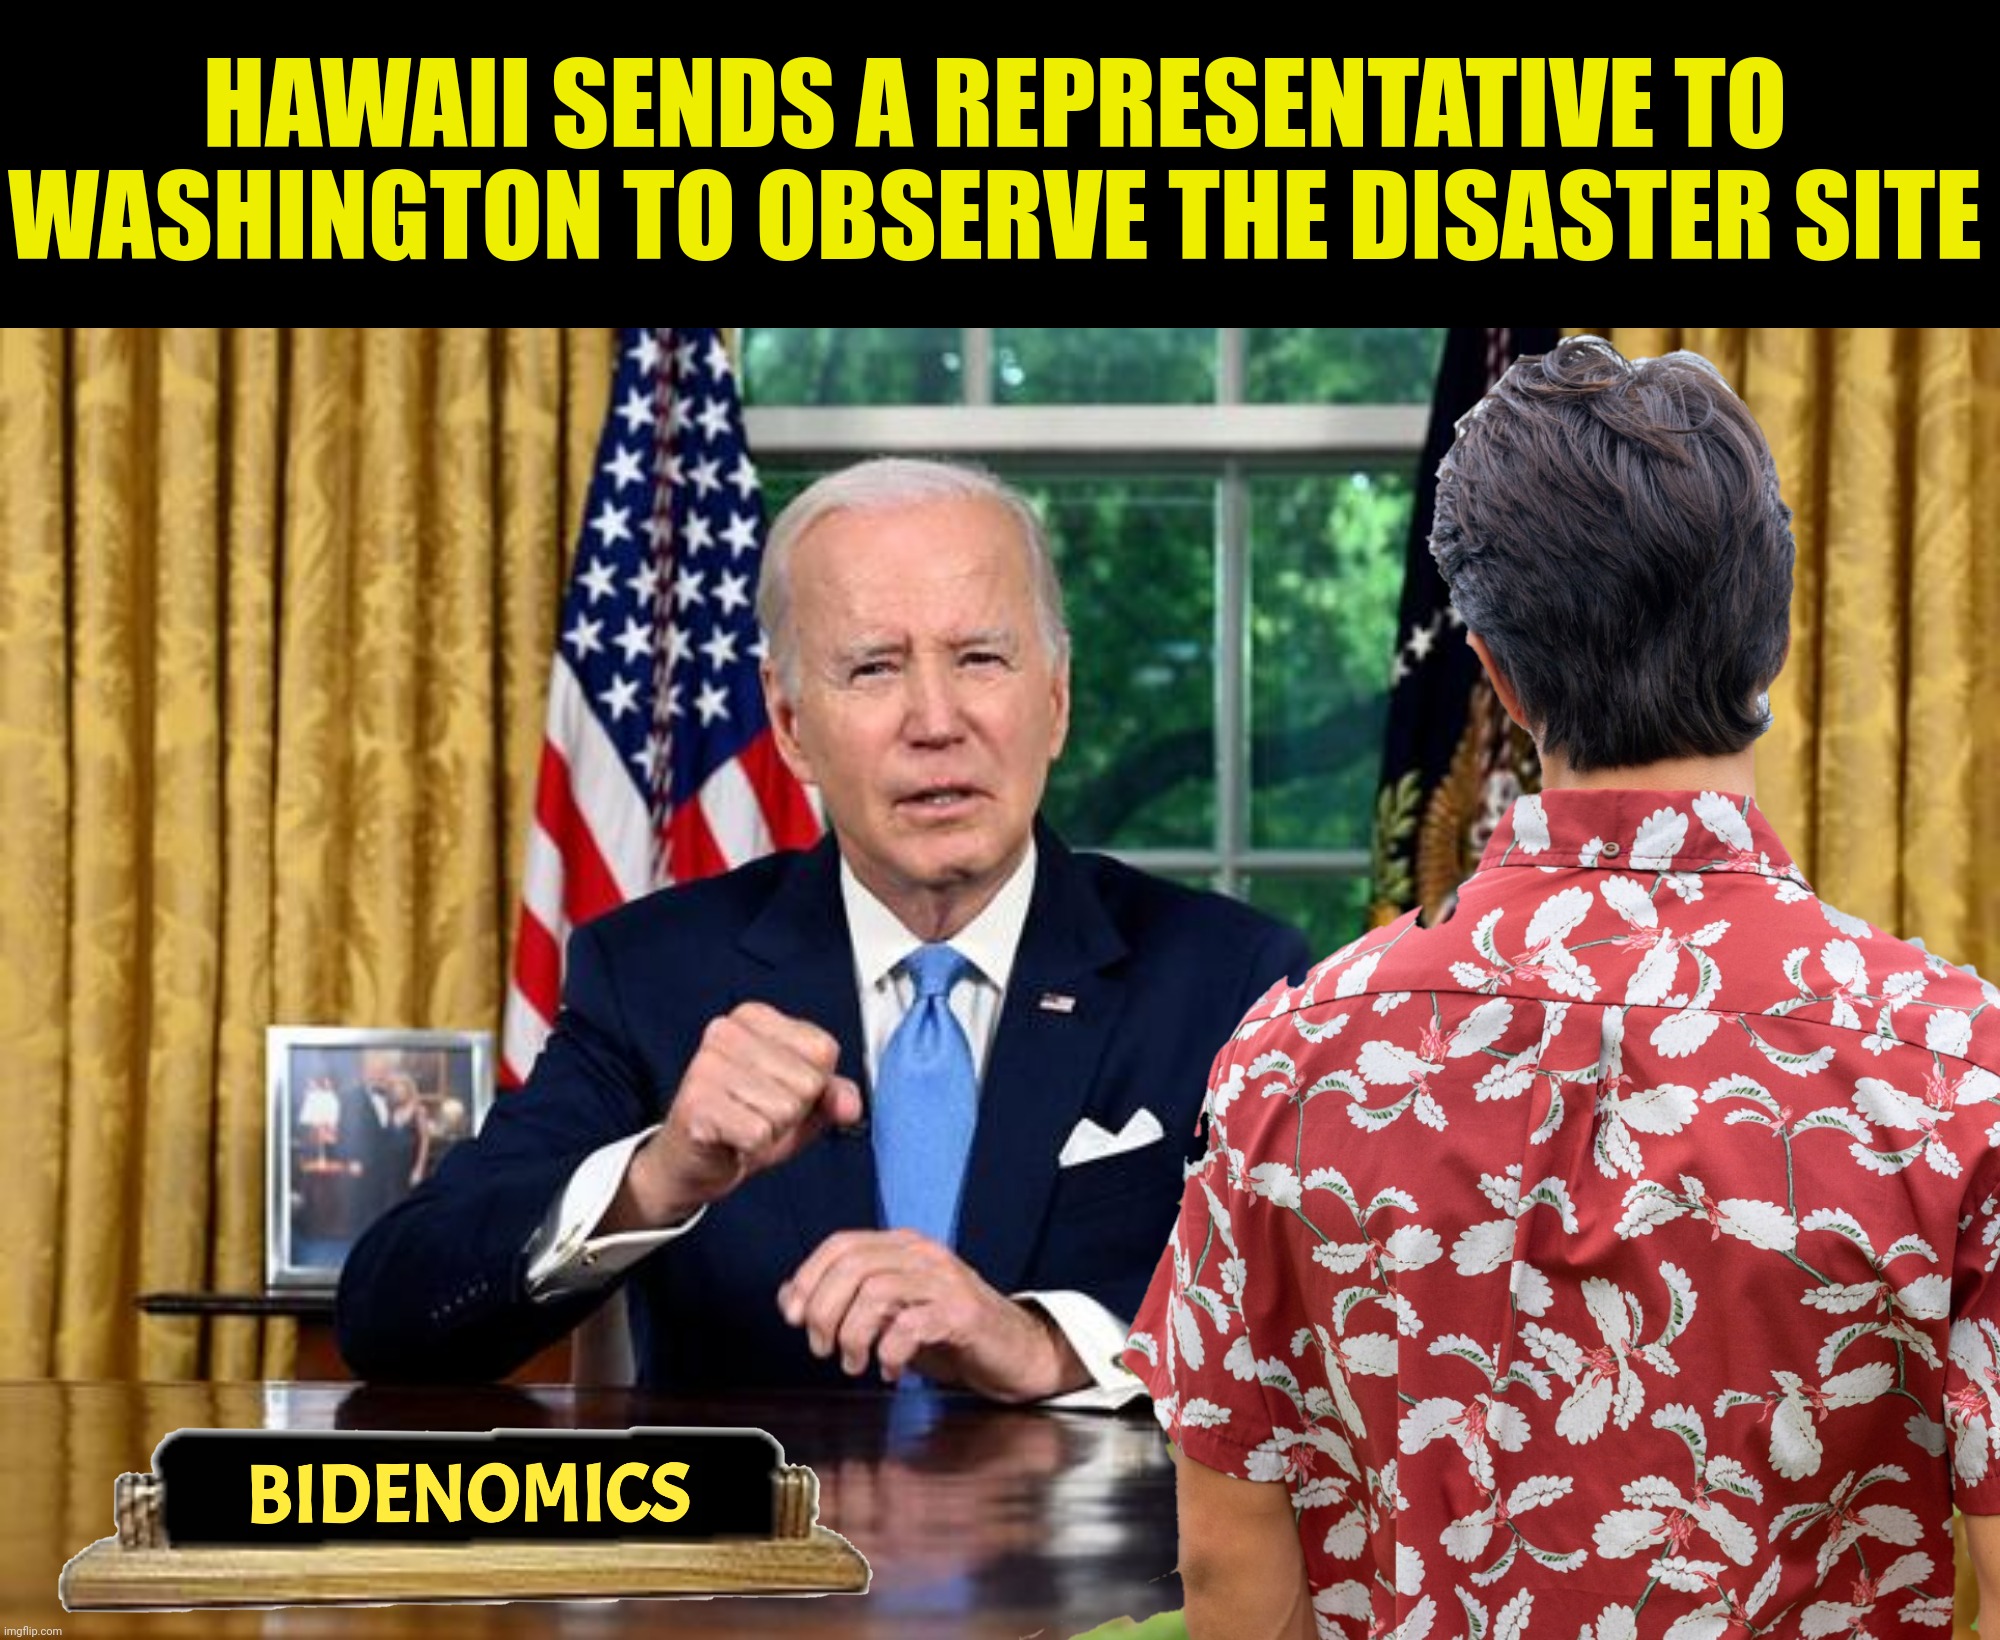 No comment | HAWAII SENDS A REPRESENTATIVE TO WASHINGTON TO OBSERVE THE DISASTER SITE | image tagged in bad photoshop,joe biden,hawaii,oval office,disaster site | made w/ Imgflip meme maker